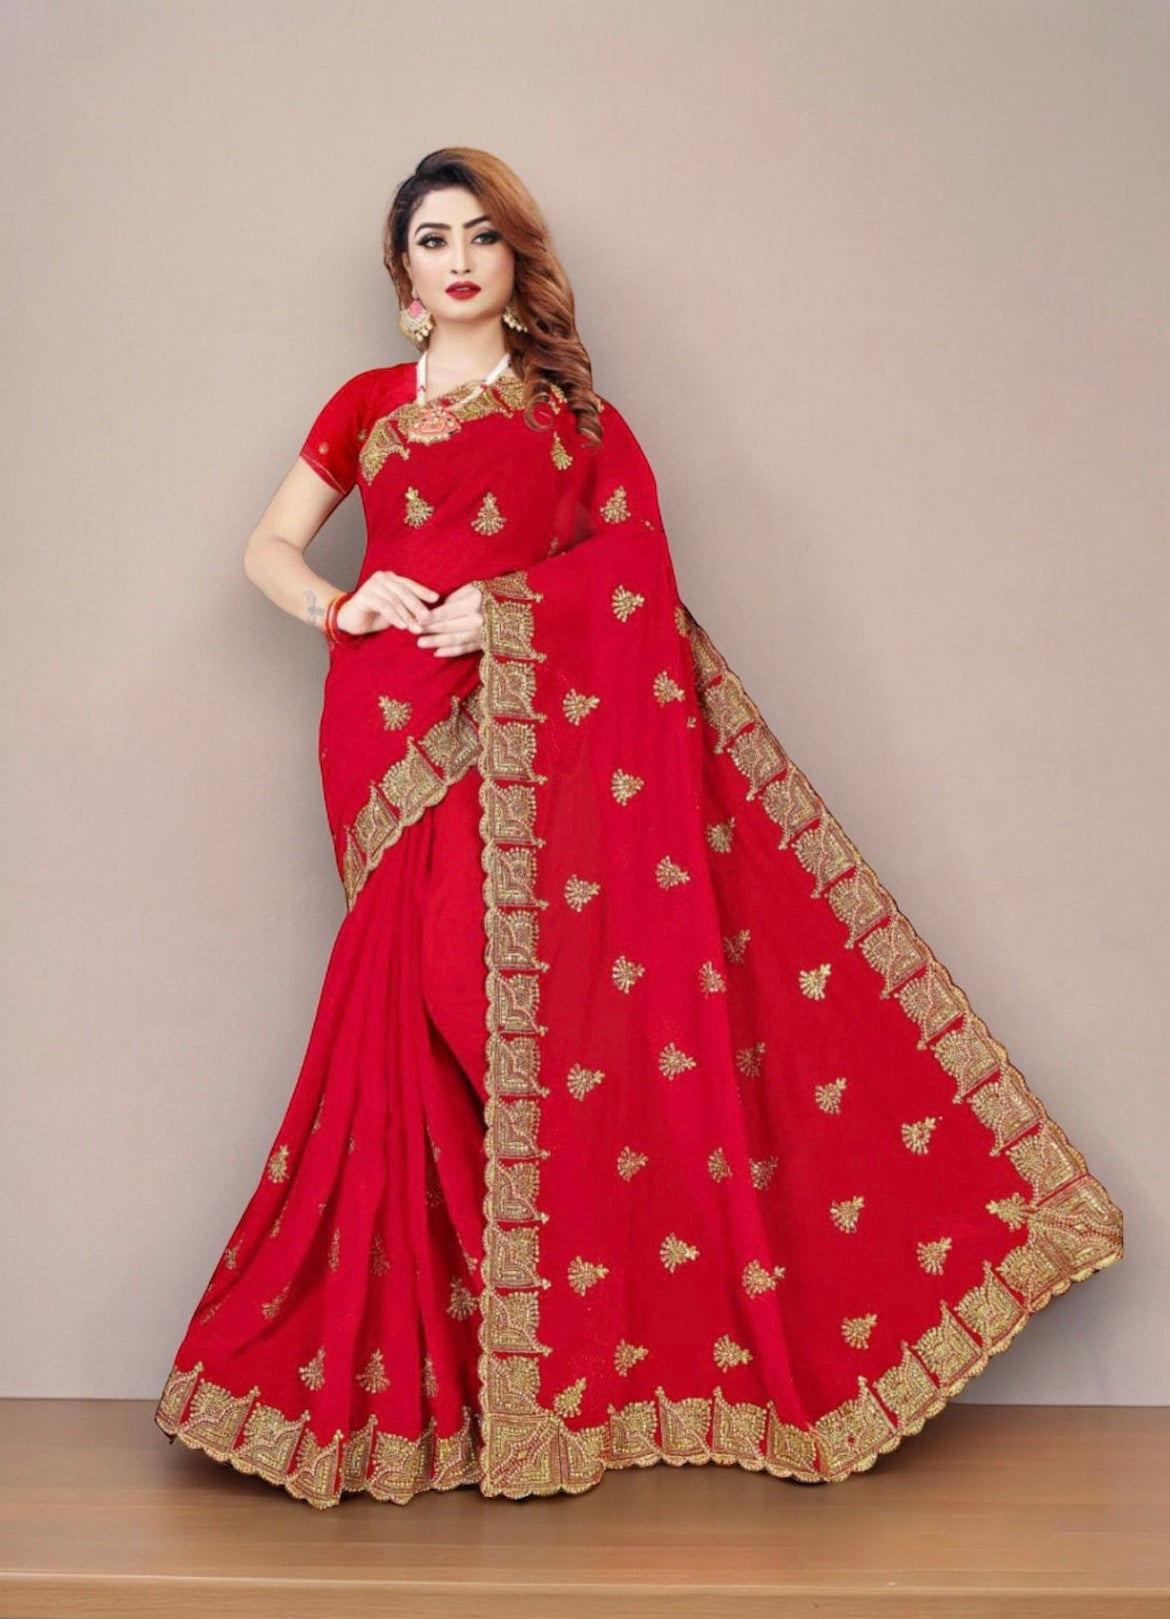 Enchanting Elegance: Stone Work Saree for a Mesmerizing Party Look